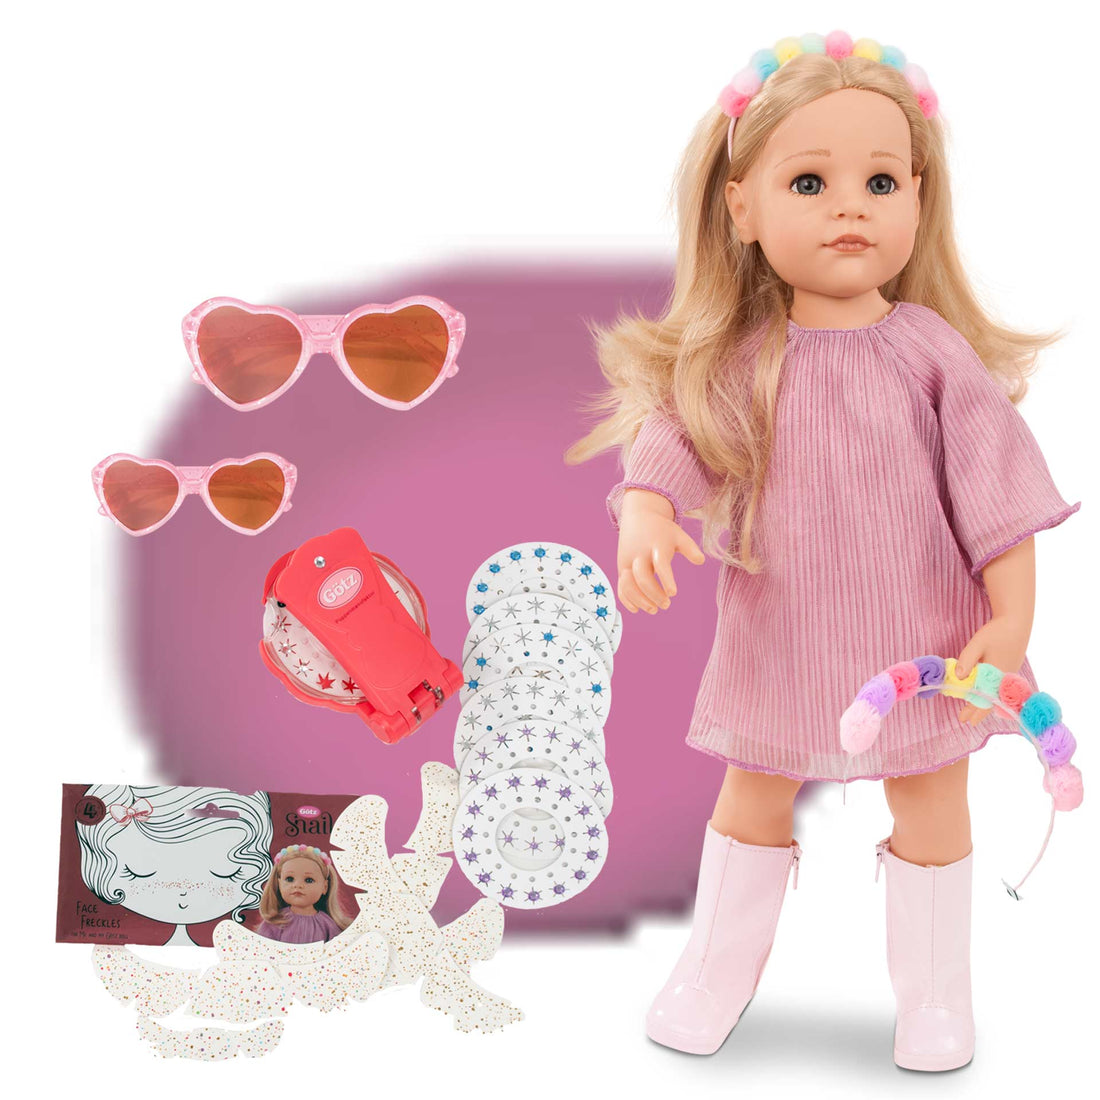 Hannah be my mini me - Dolls and Accessories